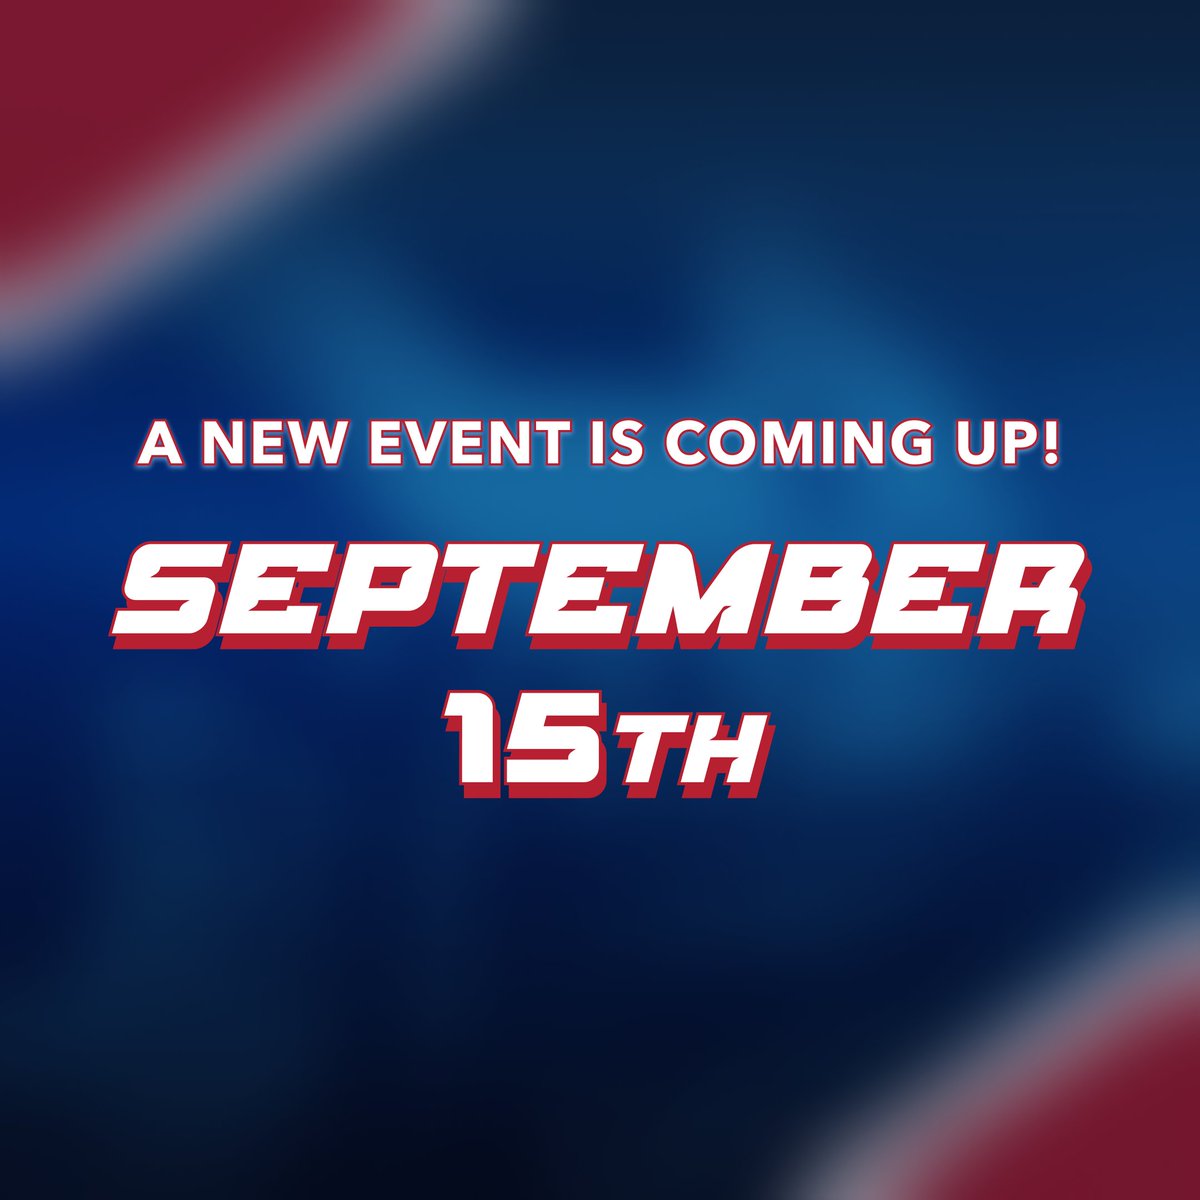 NHL pre-season is nearly here and we can't wait! 🏒 To celebrate we're releasing a new event! 🍾 More info coming soon 😎